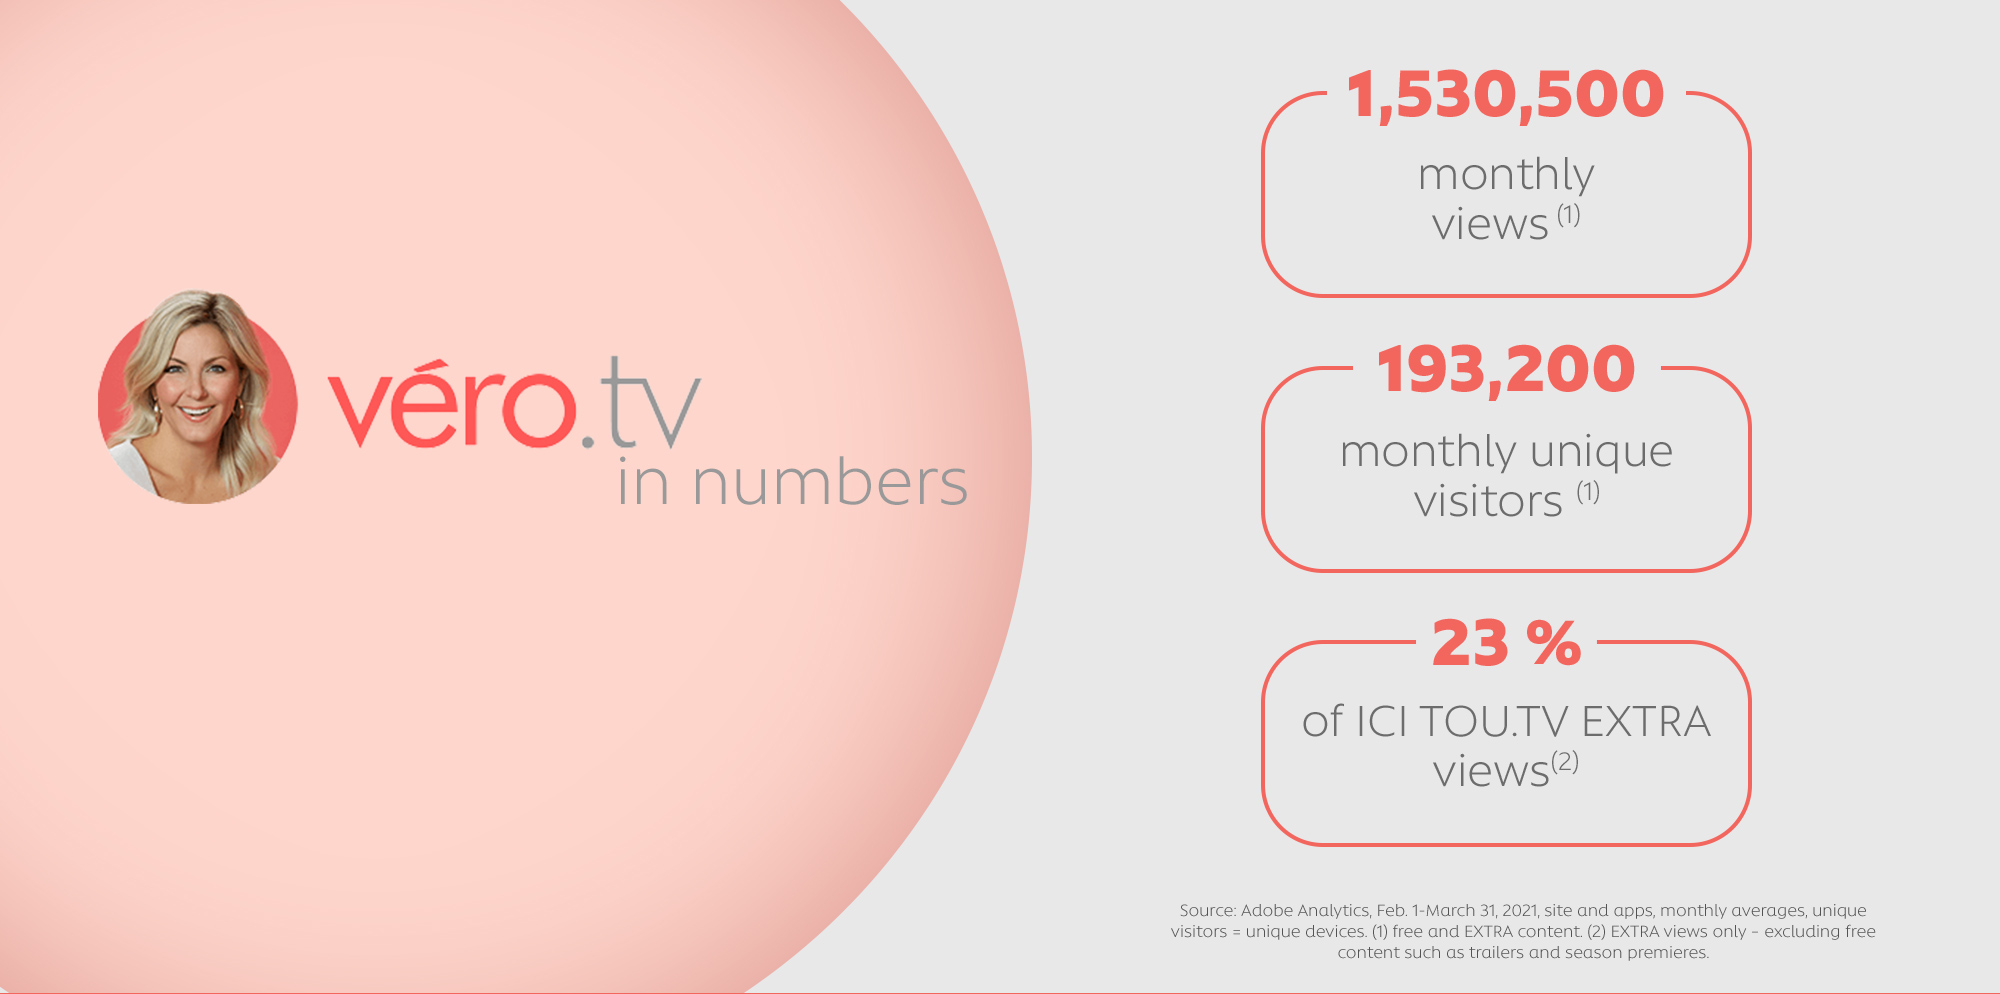 Véro.tv in numbers: 1,530,500 monthly views (1), 193,200 monthly unique visitors (1) and 23% of ICI TOU.TV EXTRA views (2)